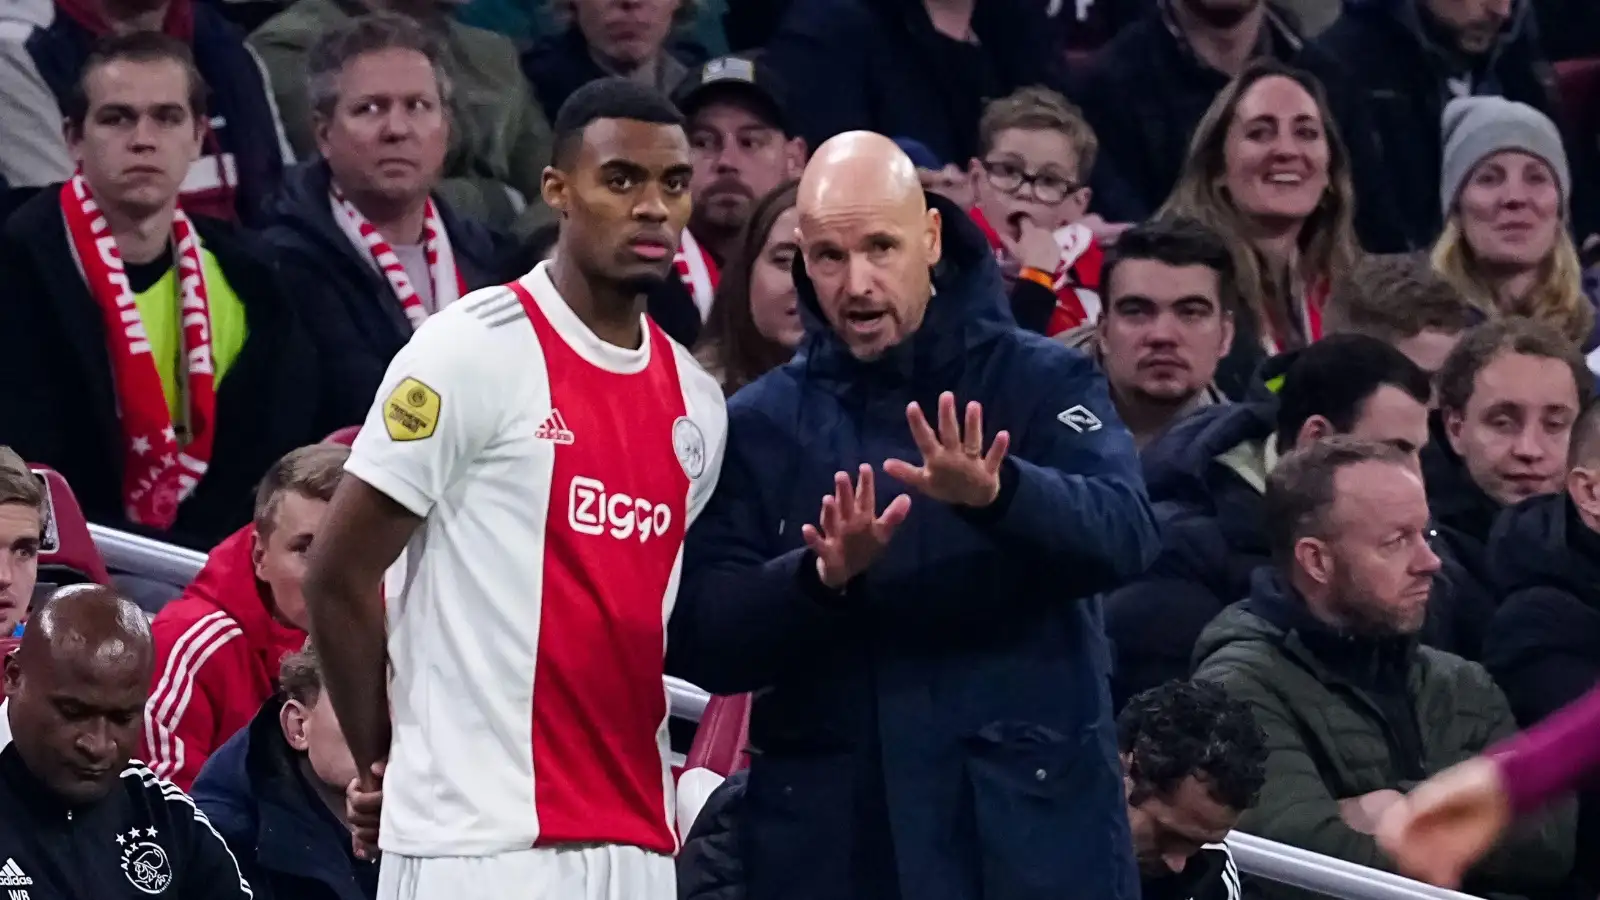 5 of Ten Hag’s former players Man Utd can target before the window closes